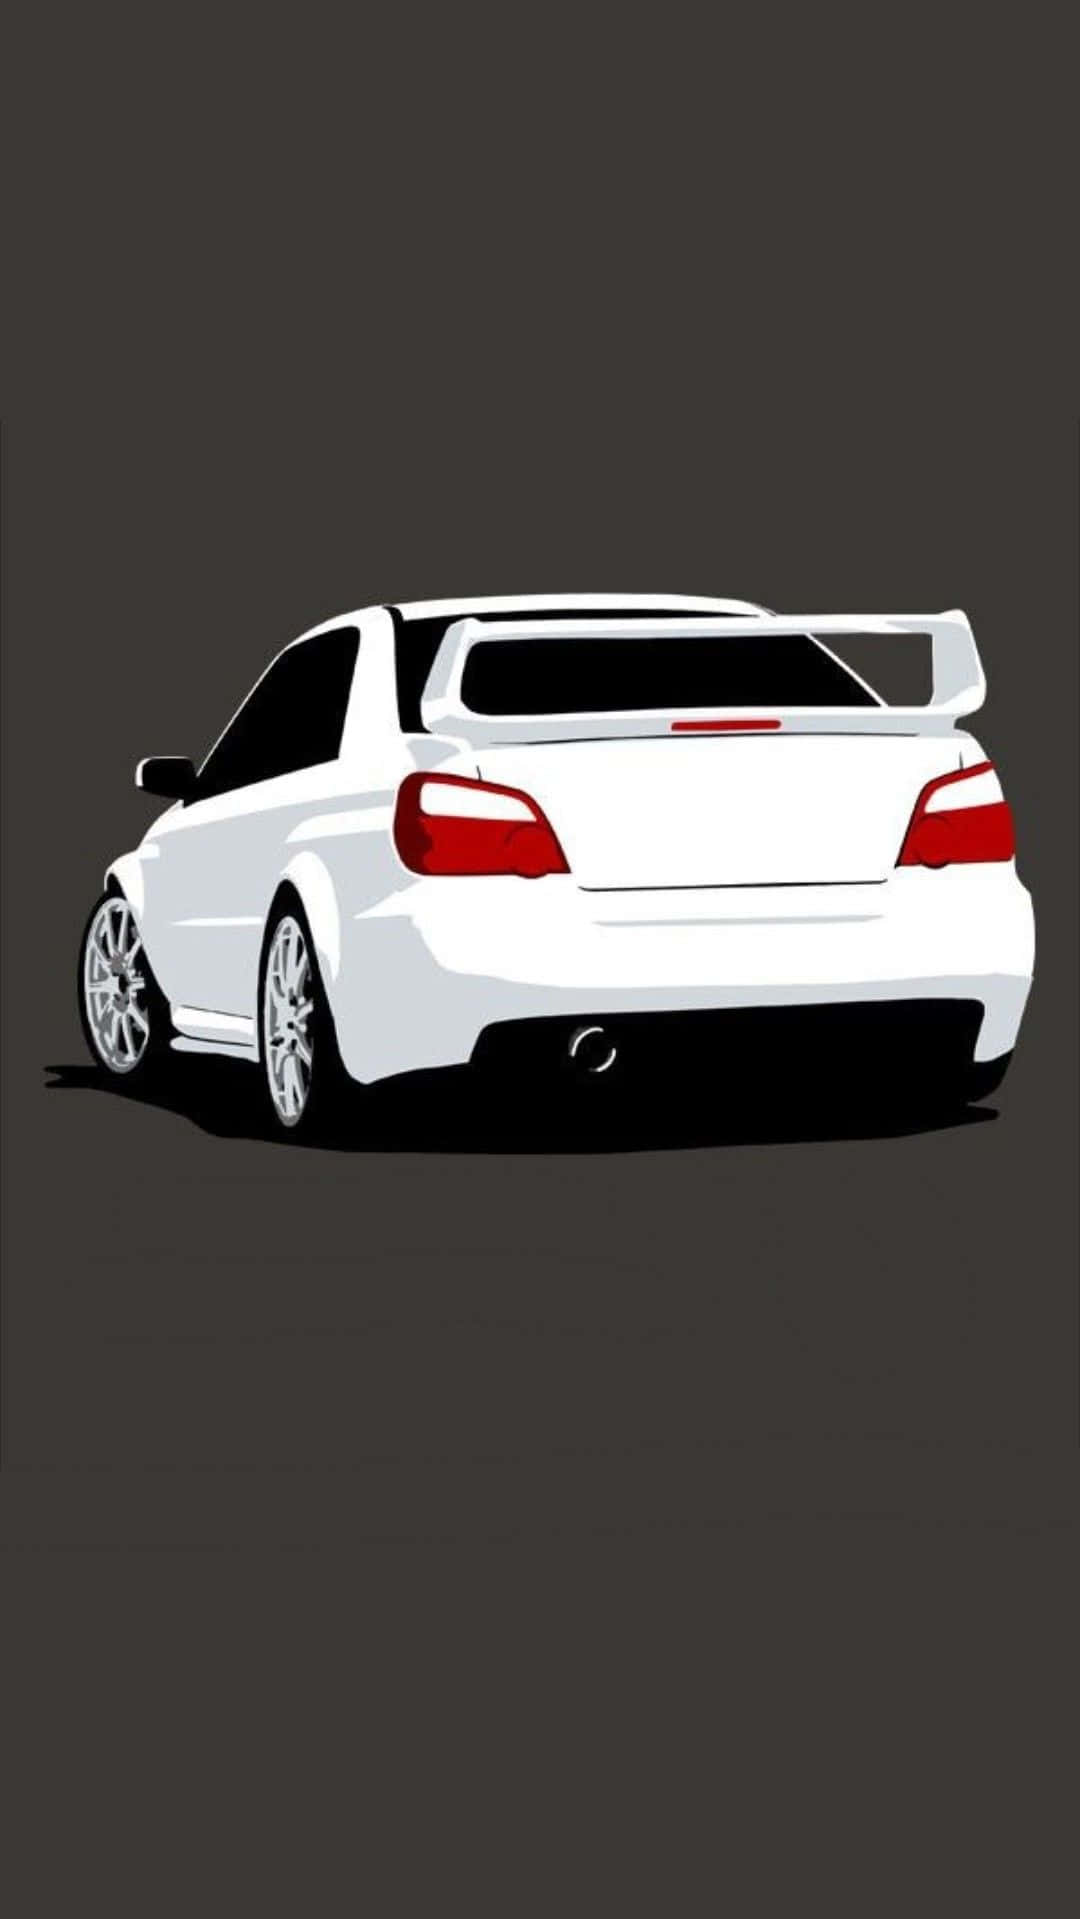 Bigger and bolder: the new Jdm Iphone Wallpaper